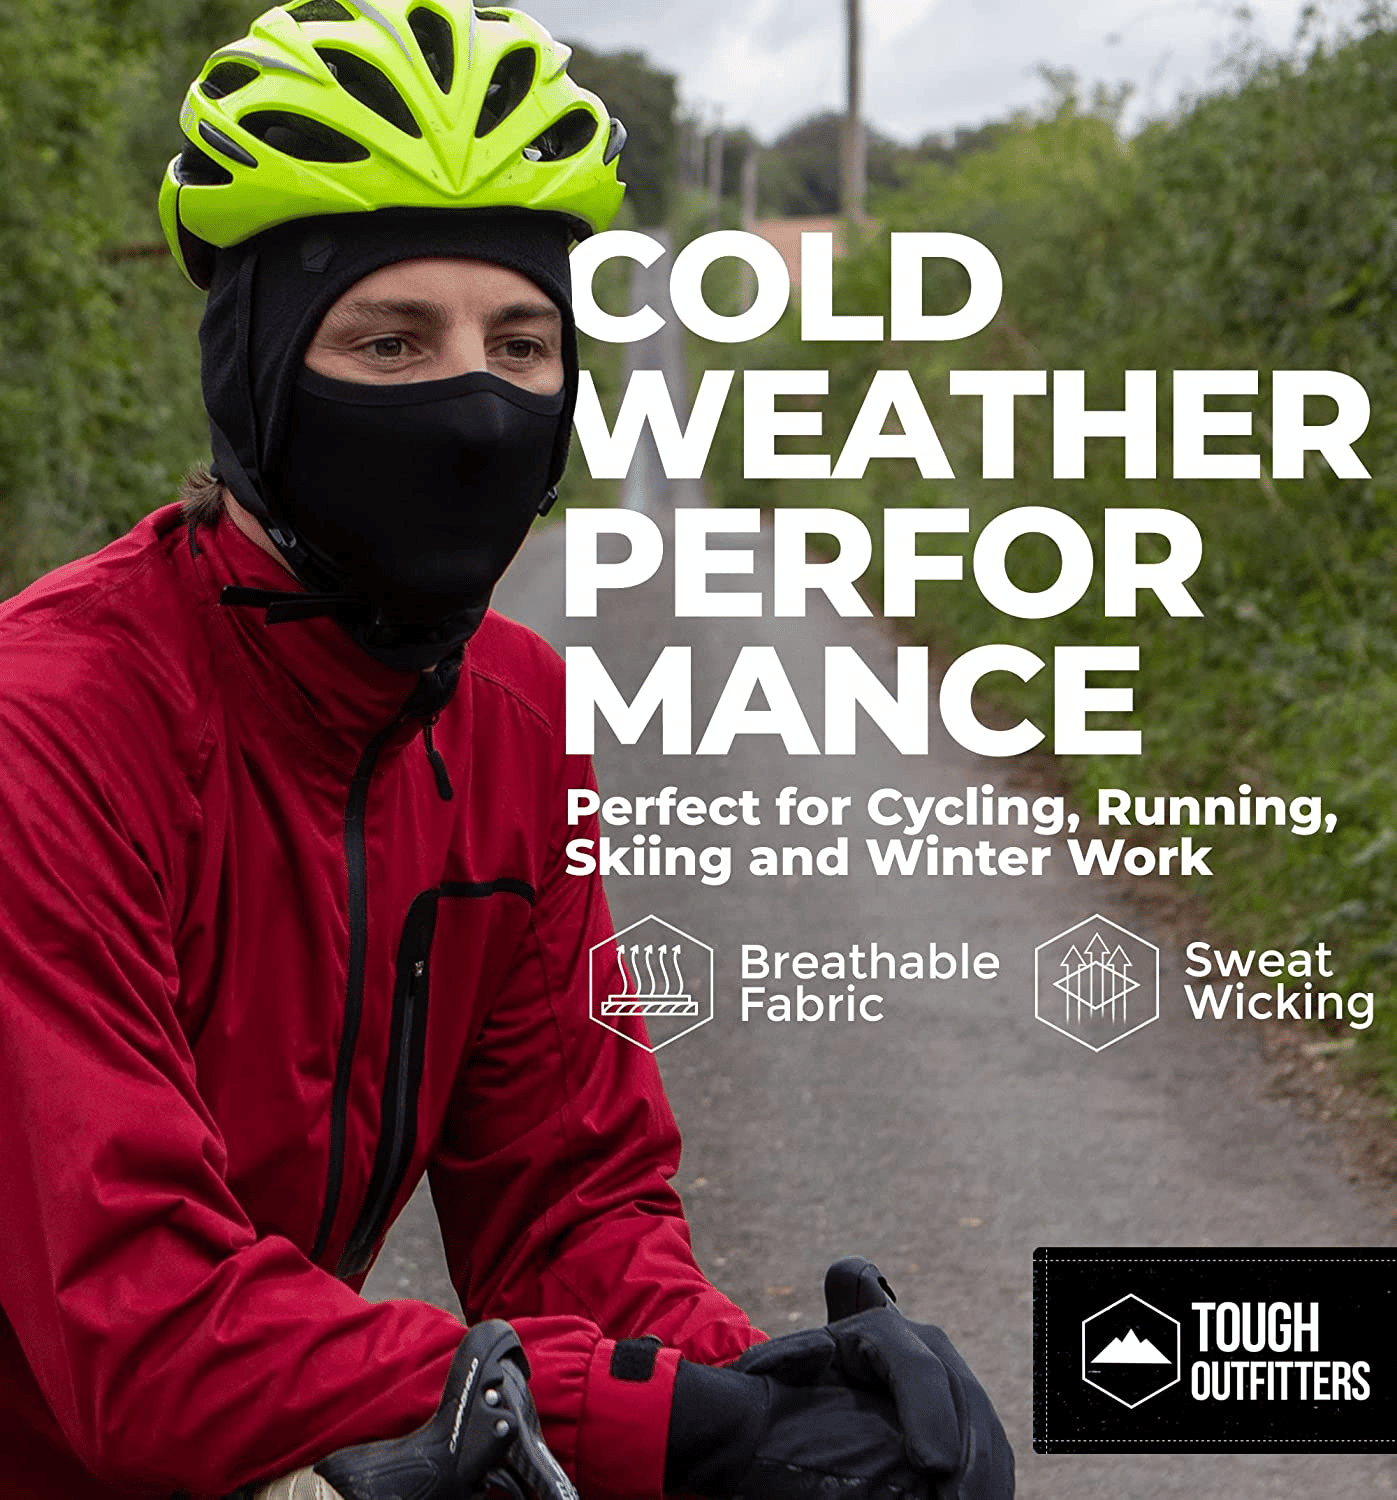 To keep warm in cold temperatures wear a thermal hat under your helmet.